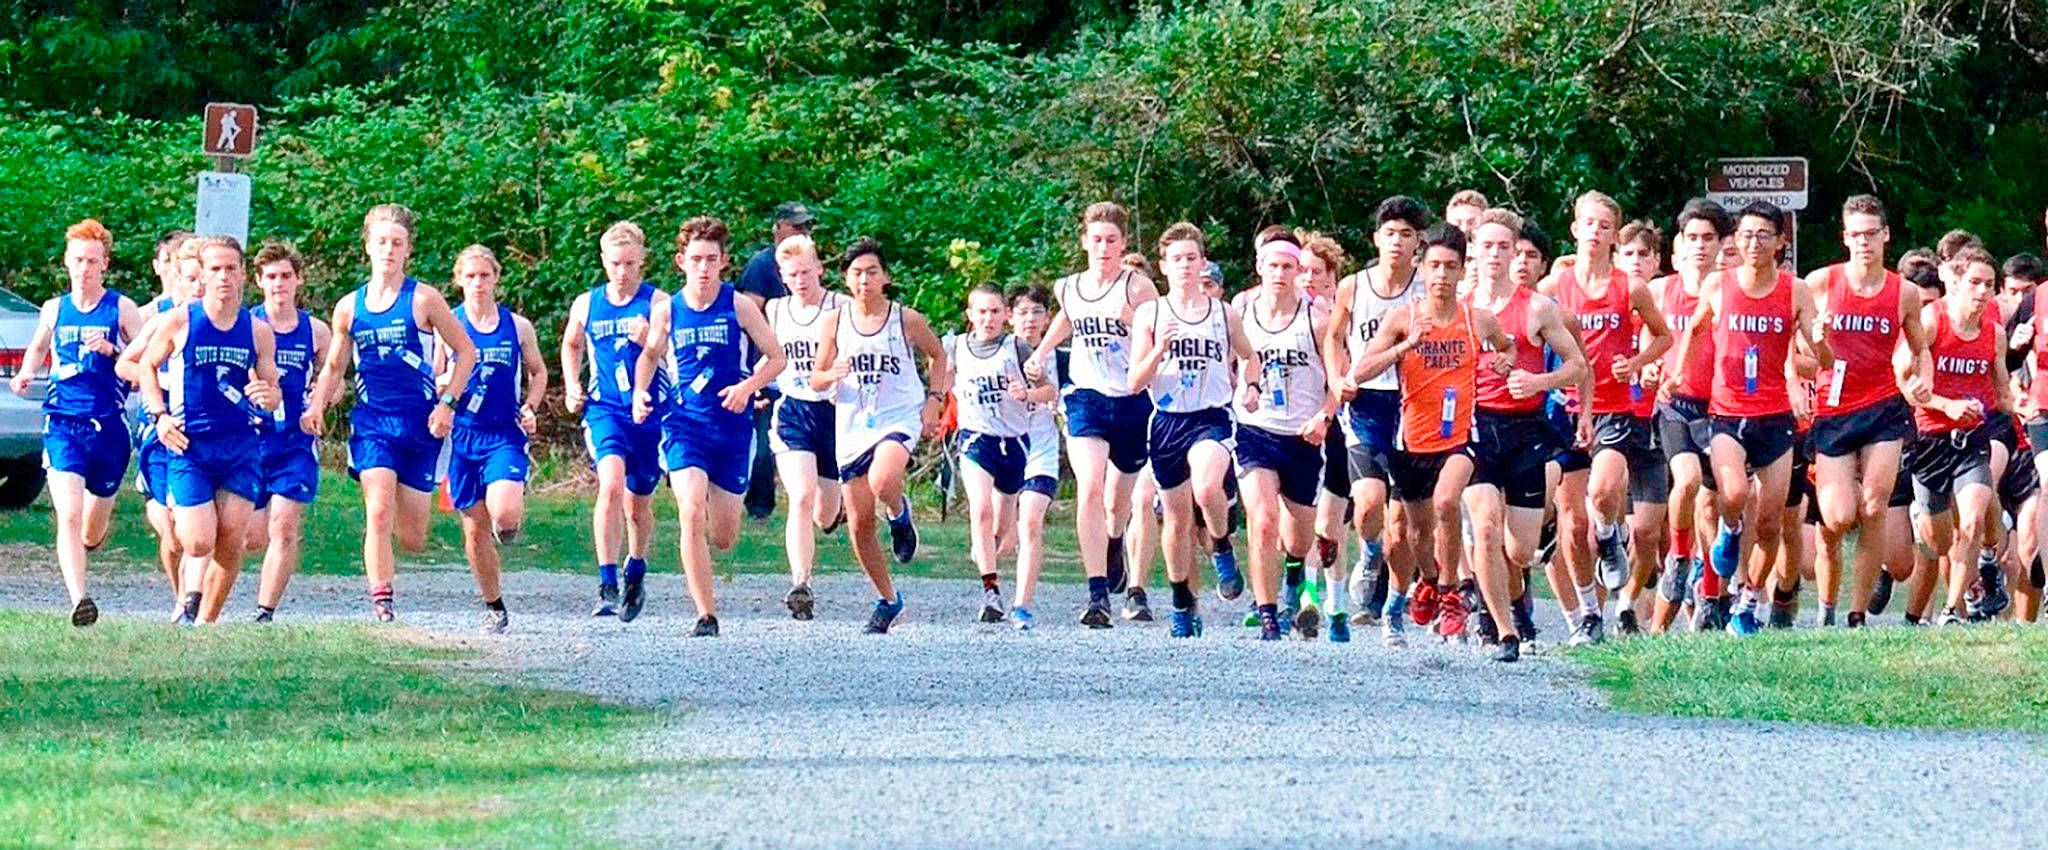 The South Whidbey High School boys cross country team (in blue) competes in a postseason meet last fall. The Falcons will have to wait until the spring to compete this school year. (Whidbey News-Times file)